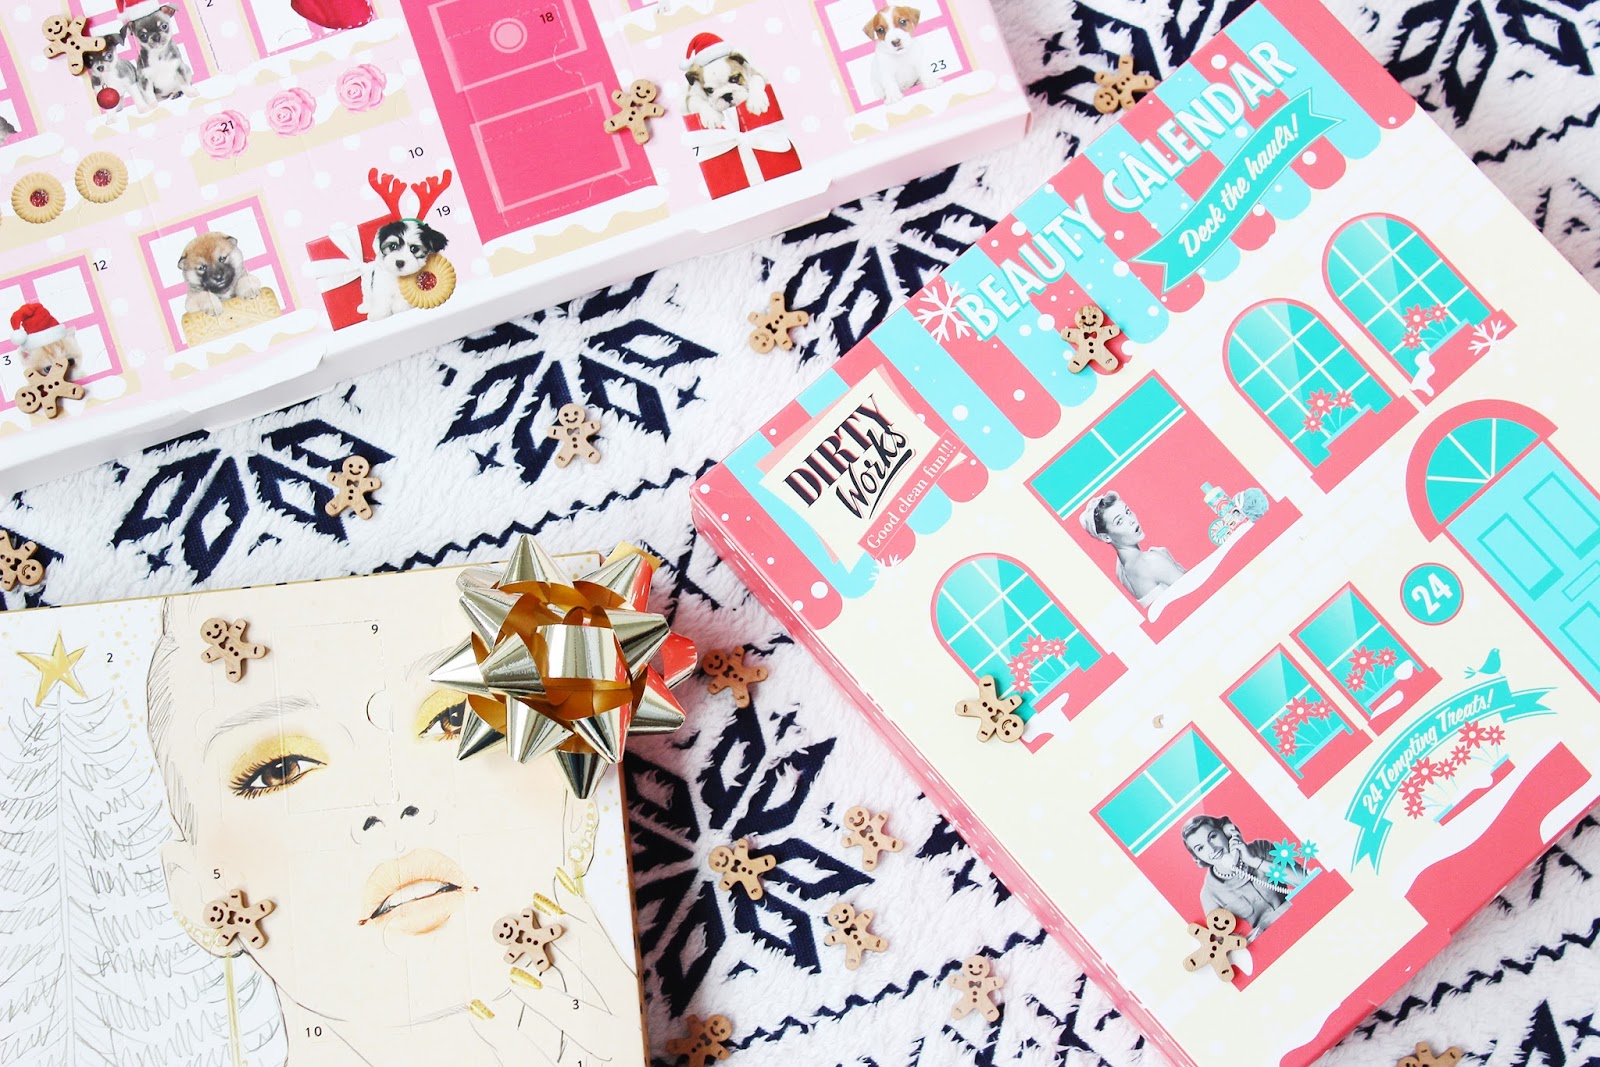 Budget friendly beauty advent calendars for £15 or less